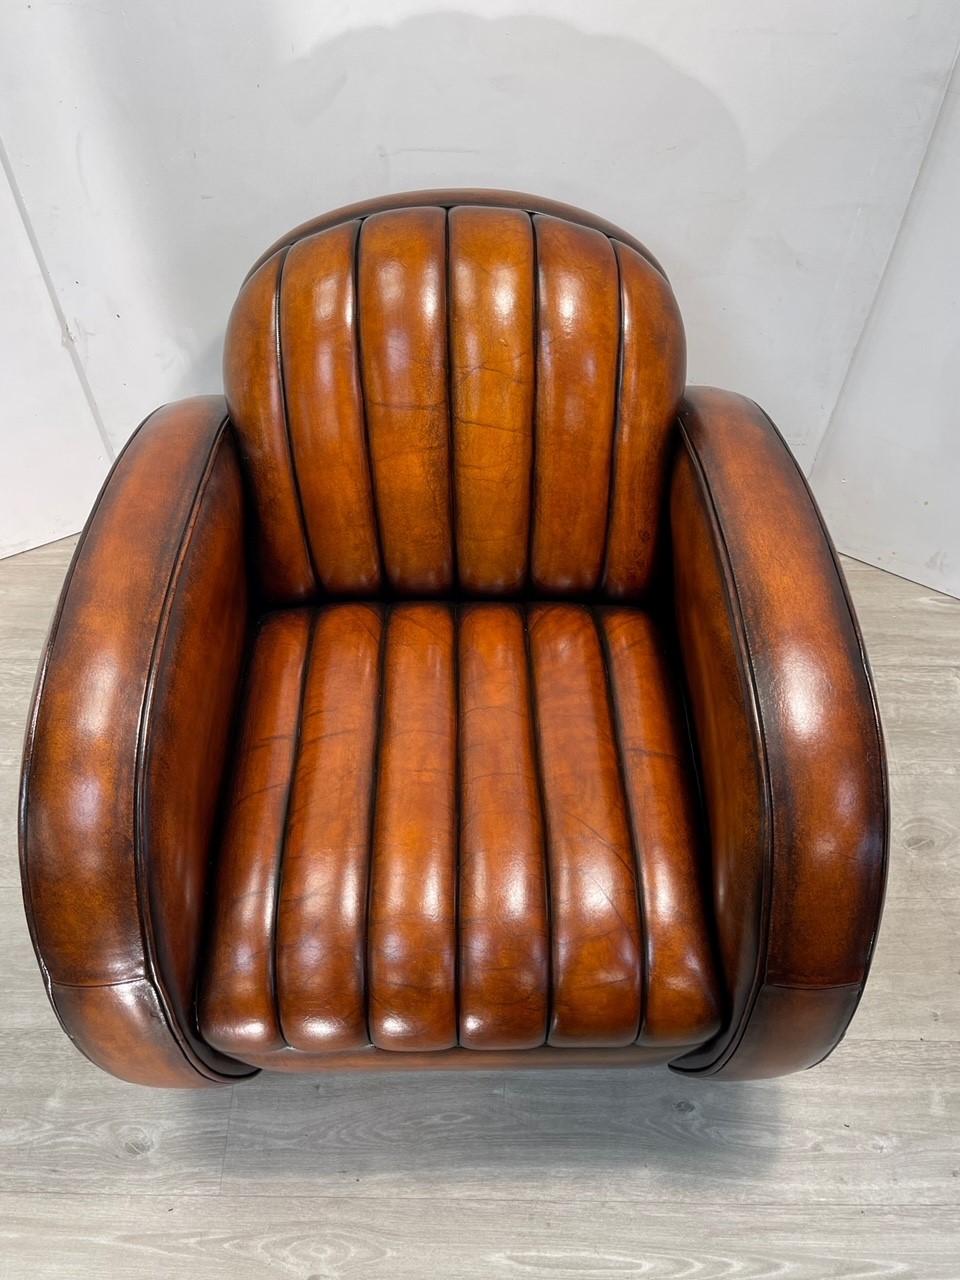 Hand-Crafted Rare Vintage Mustang Car Seat Armchair Based on the 1966 Fastback Brown Leather